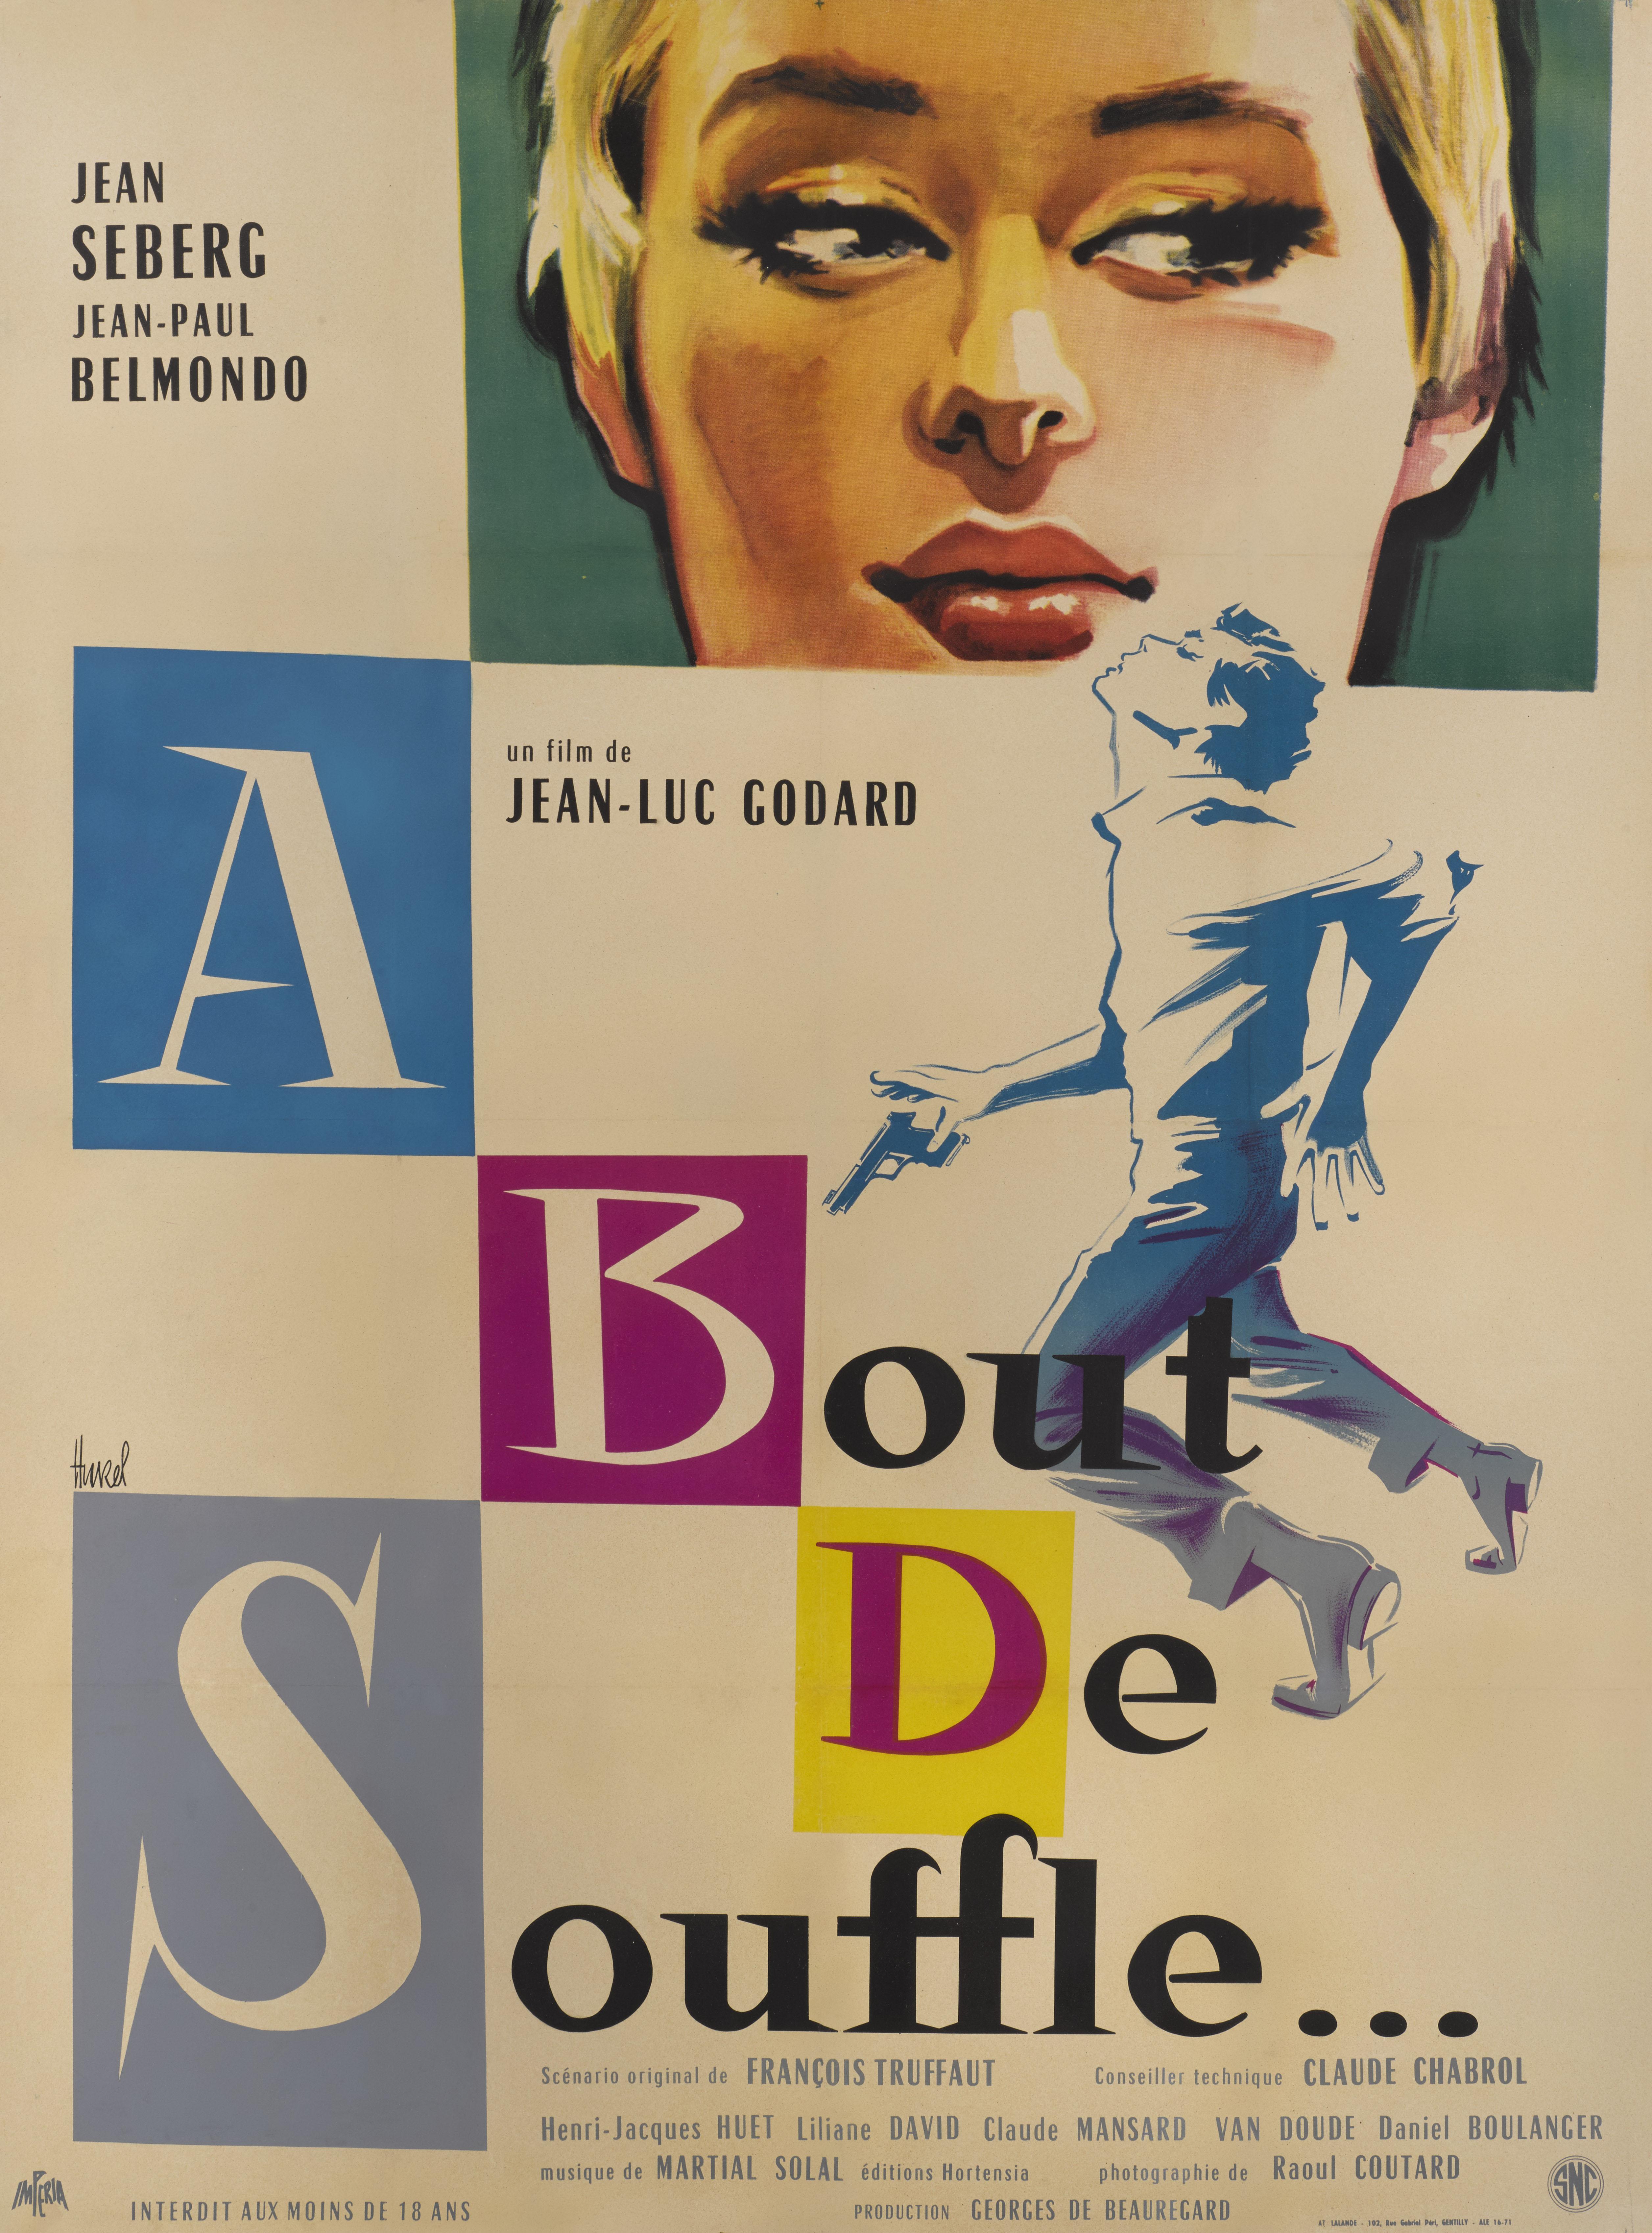 A Bout De Souffle 5 For Sale On 1stdibs